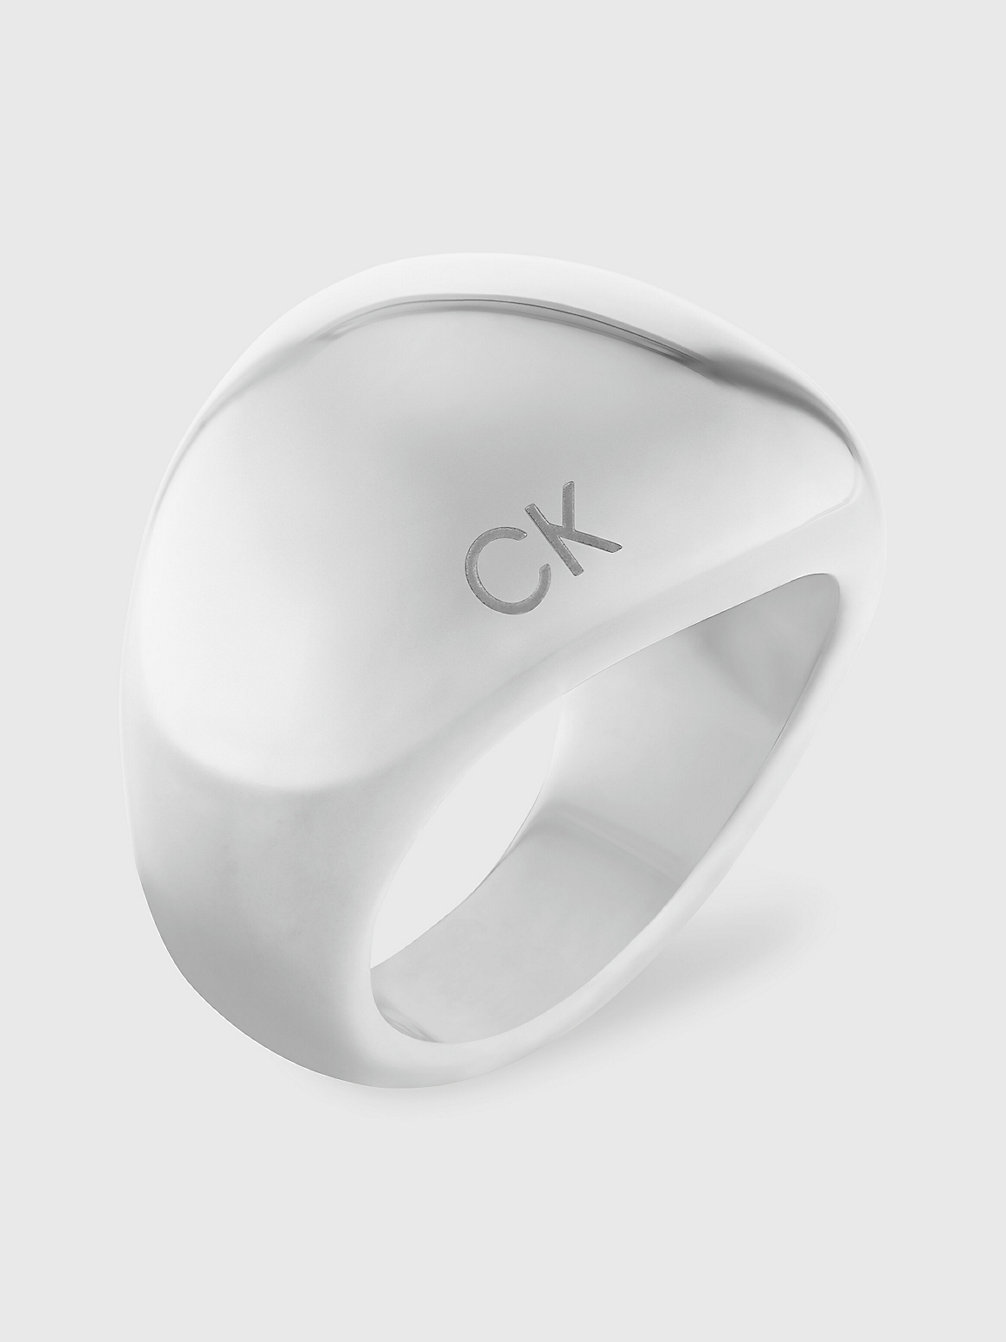 Anillo - Playful Organic Shapes > SILVER > undefined mujer > Calvin Klein